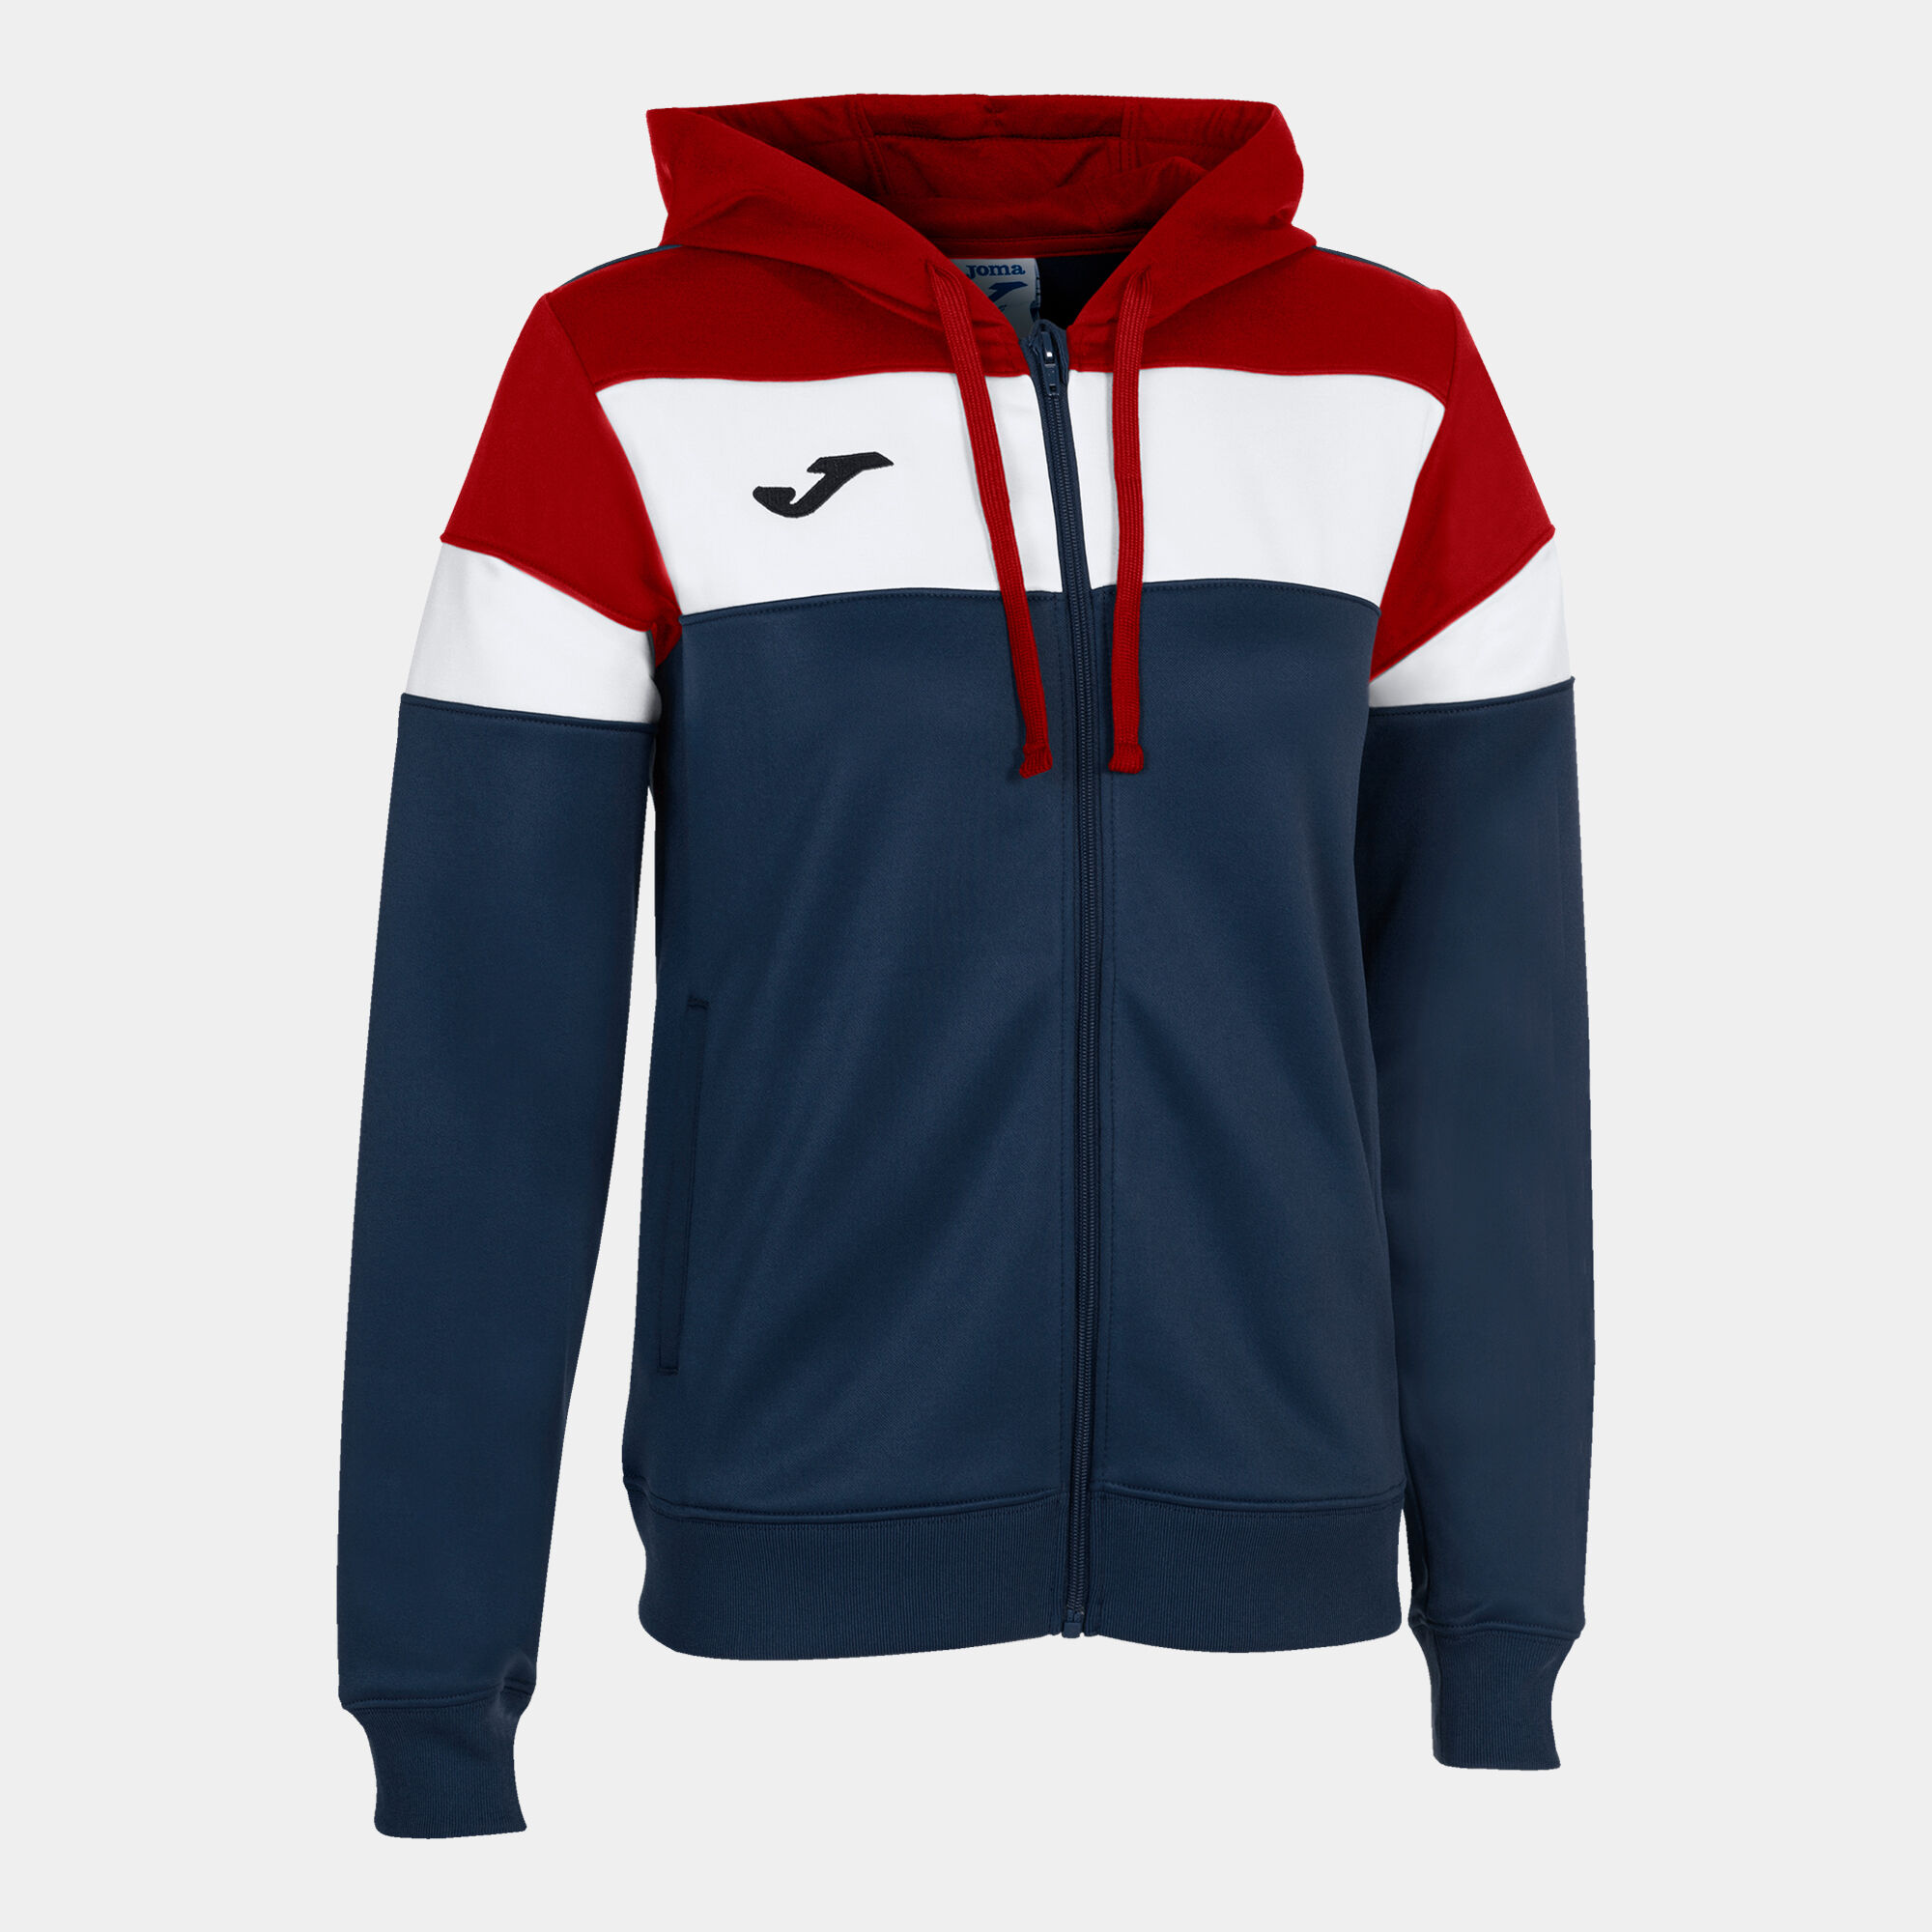 HOODED JACKET WOMAN CREW IV NAVY BLUE RED WHITE